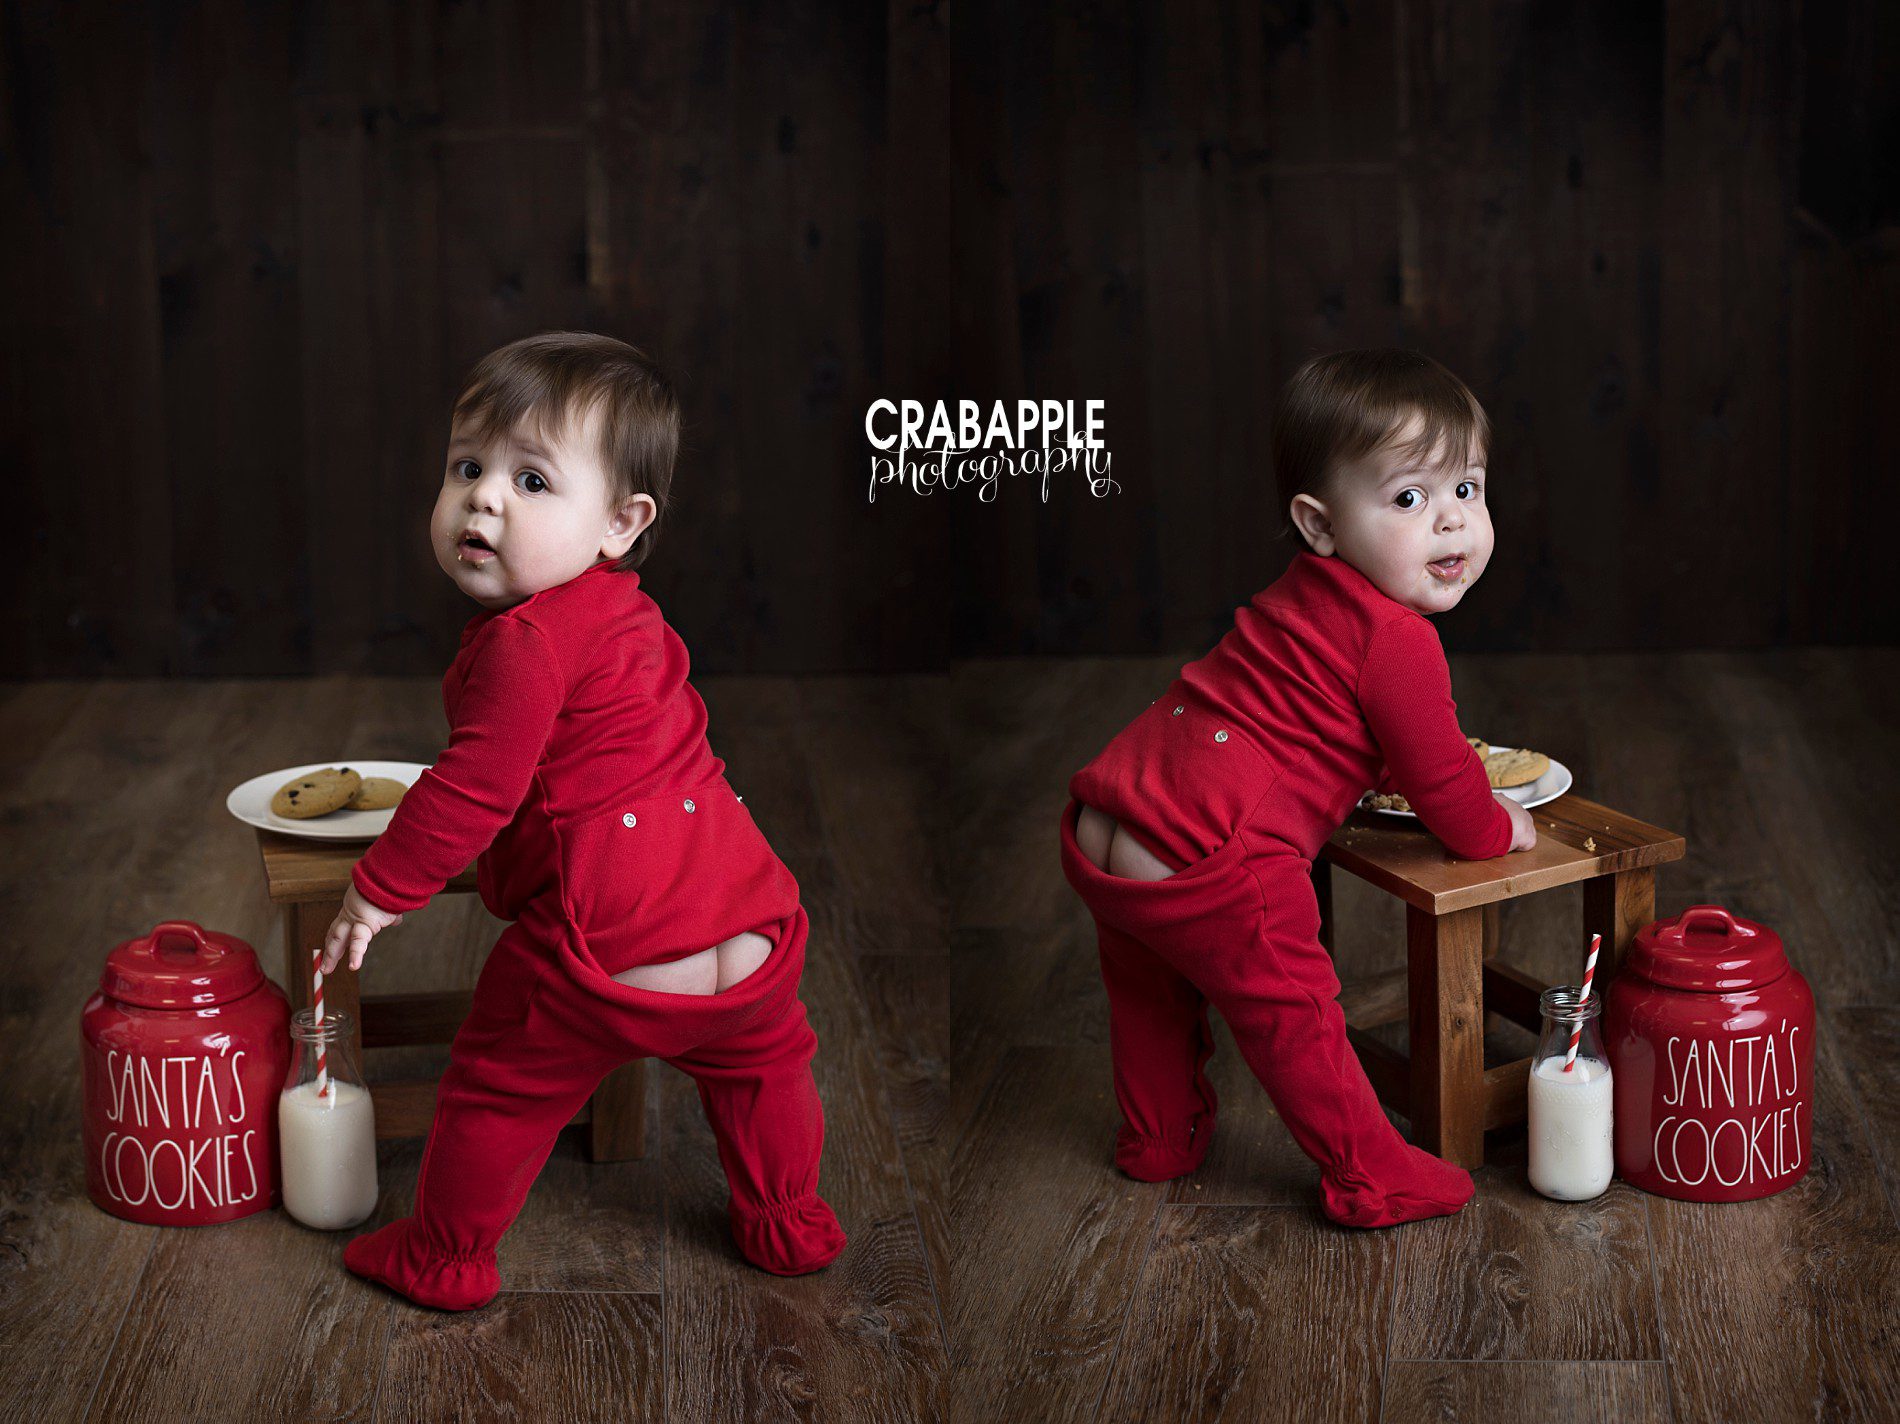 Funny and hilarious Christmas baby photos stealing Santa's cookies.